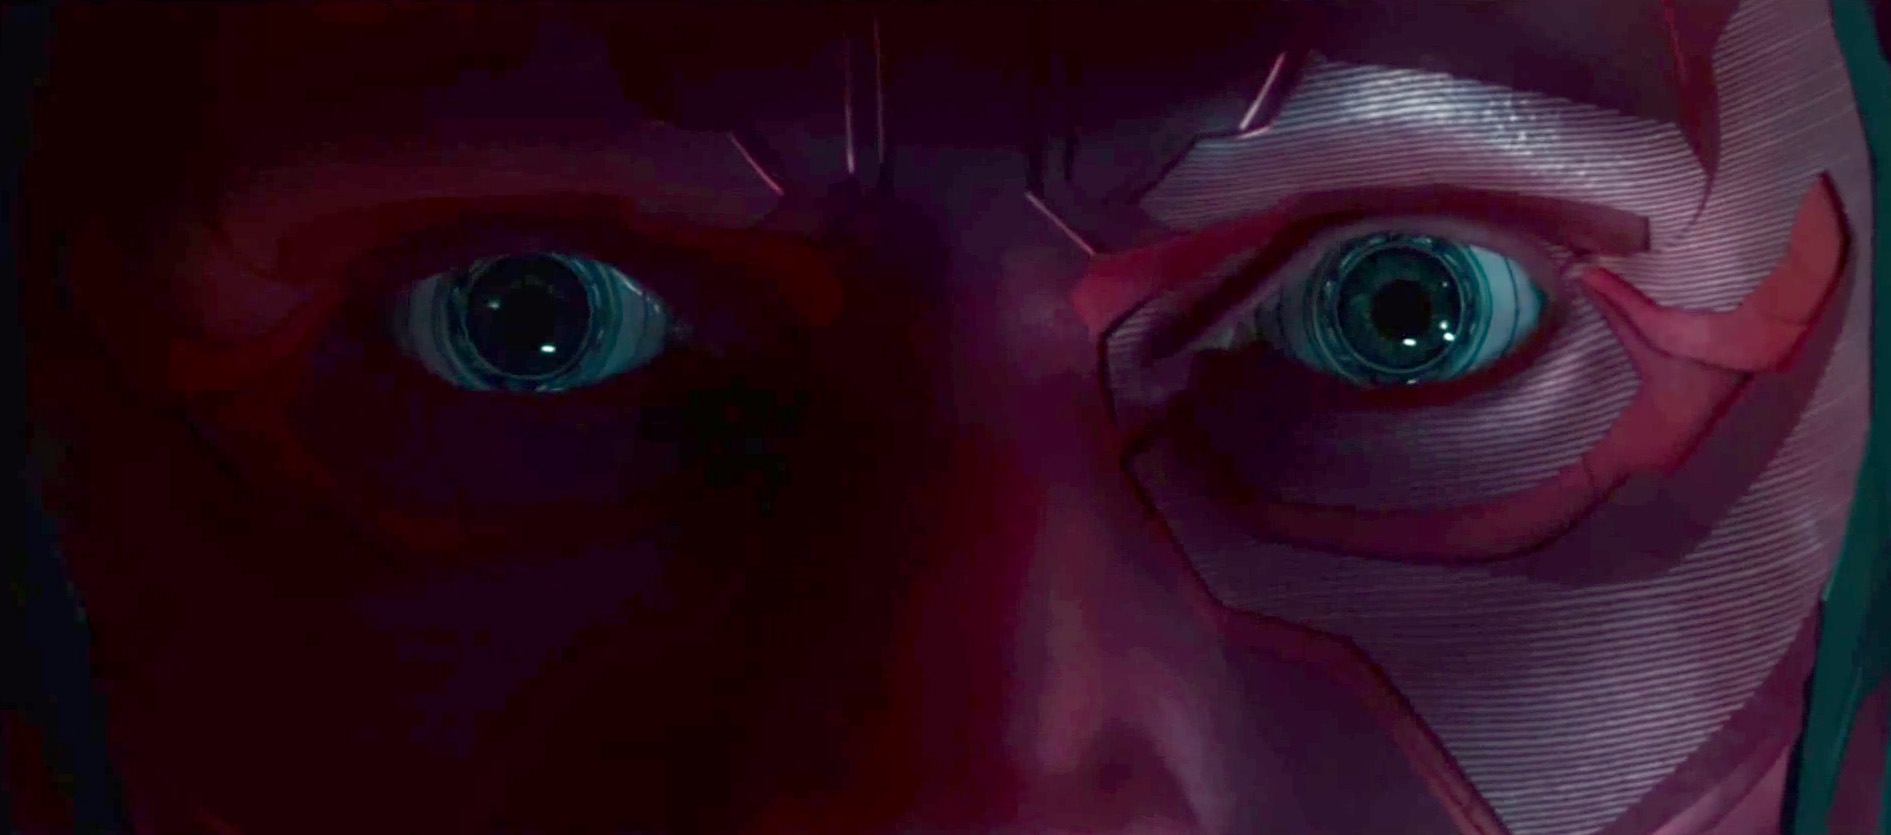 PHOTO: A look at Vision in the latest trailer for Marvel's Avengers: Age of Ultron.